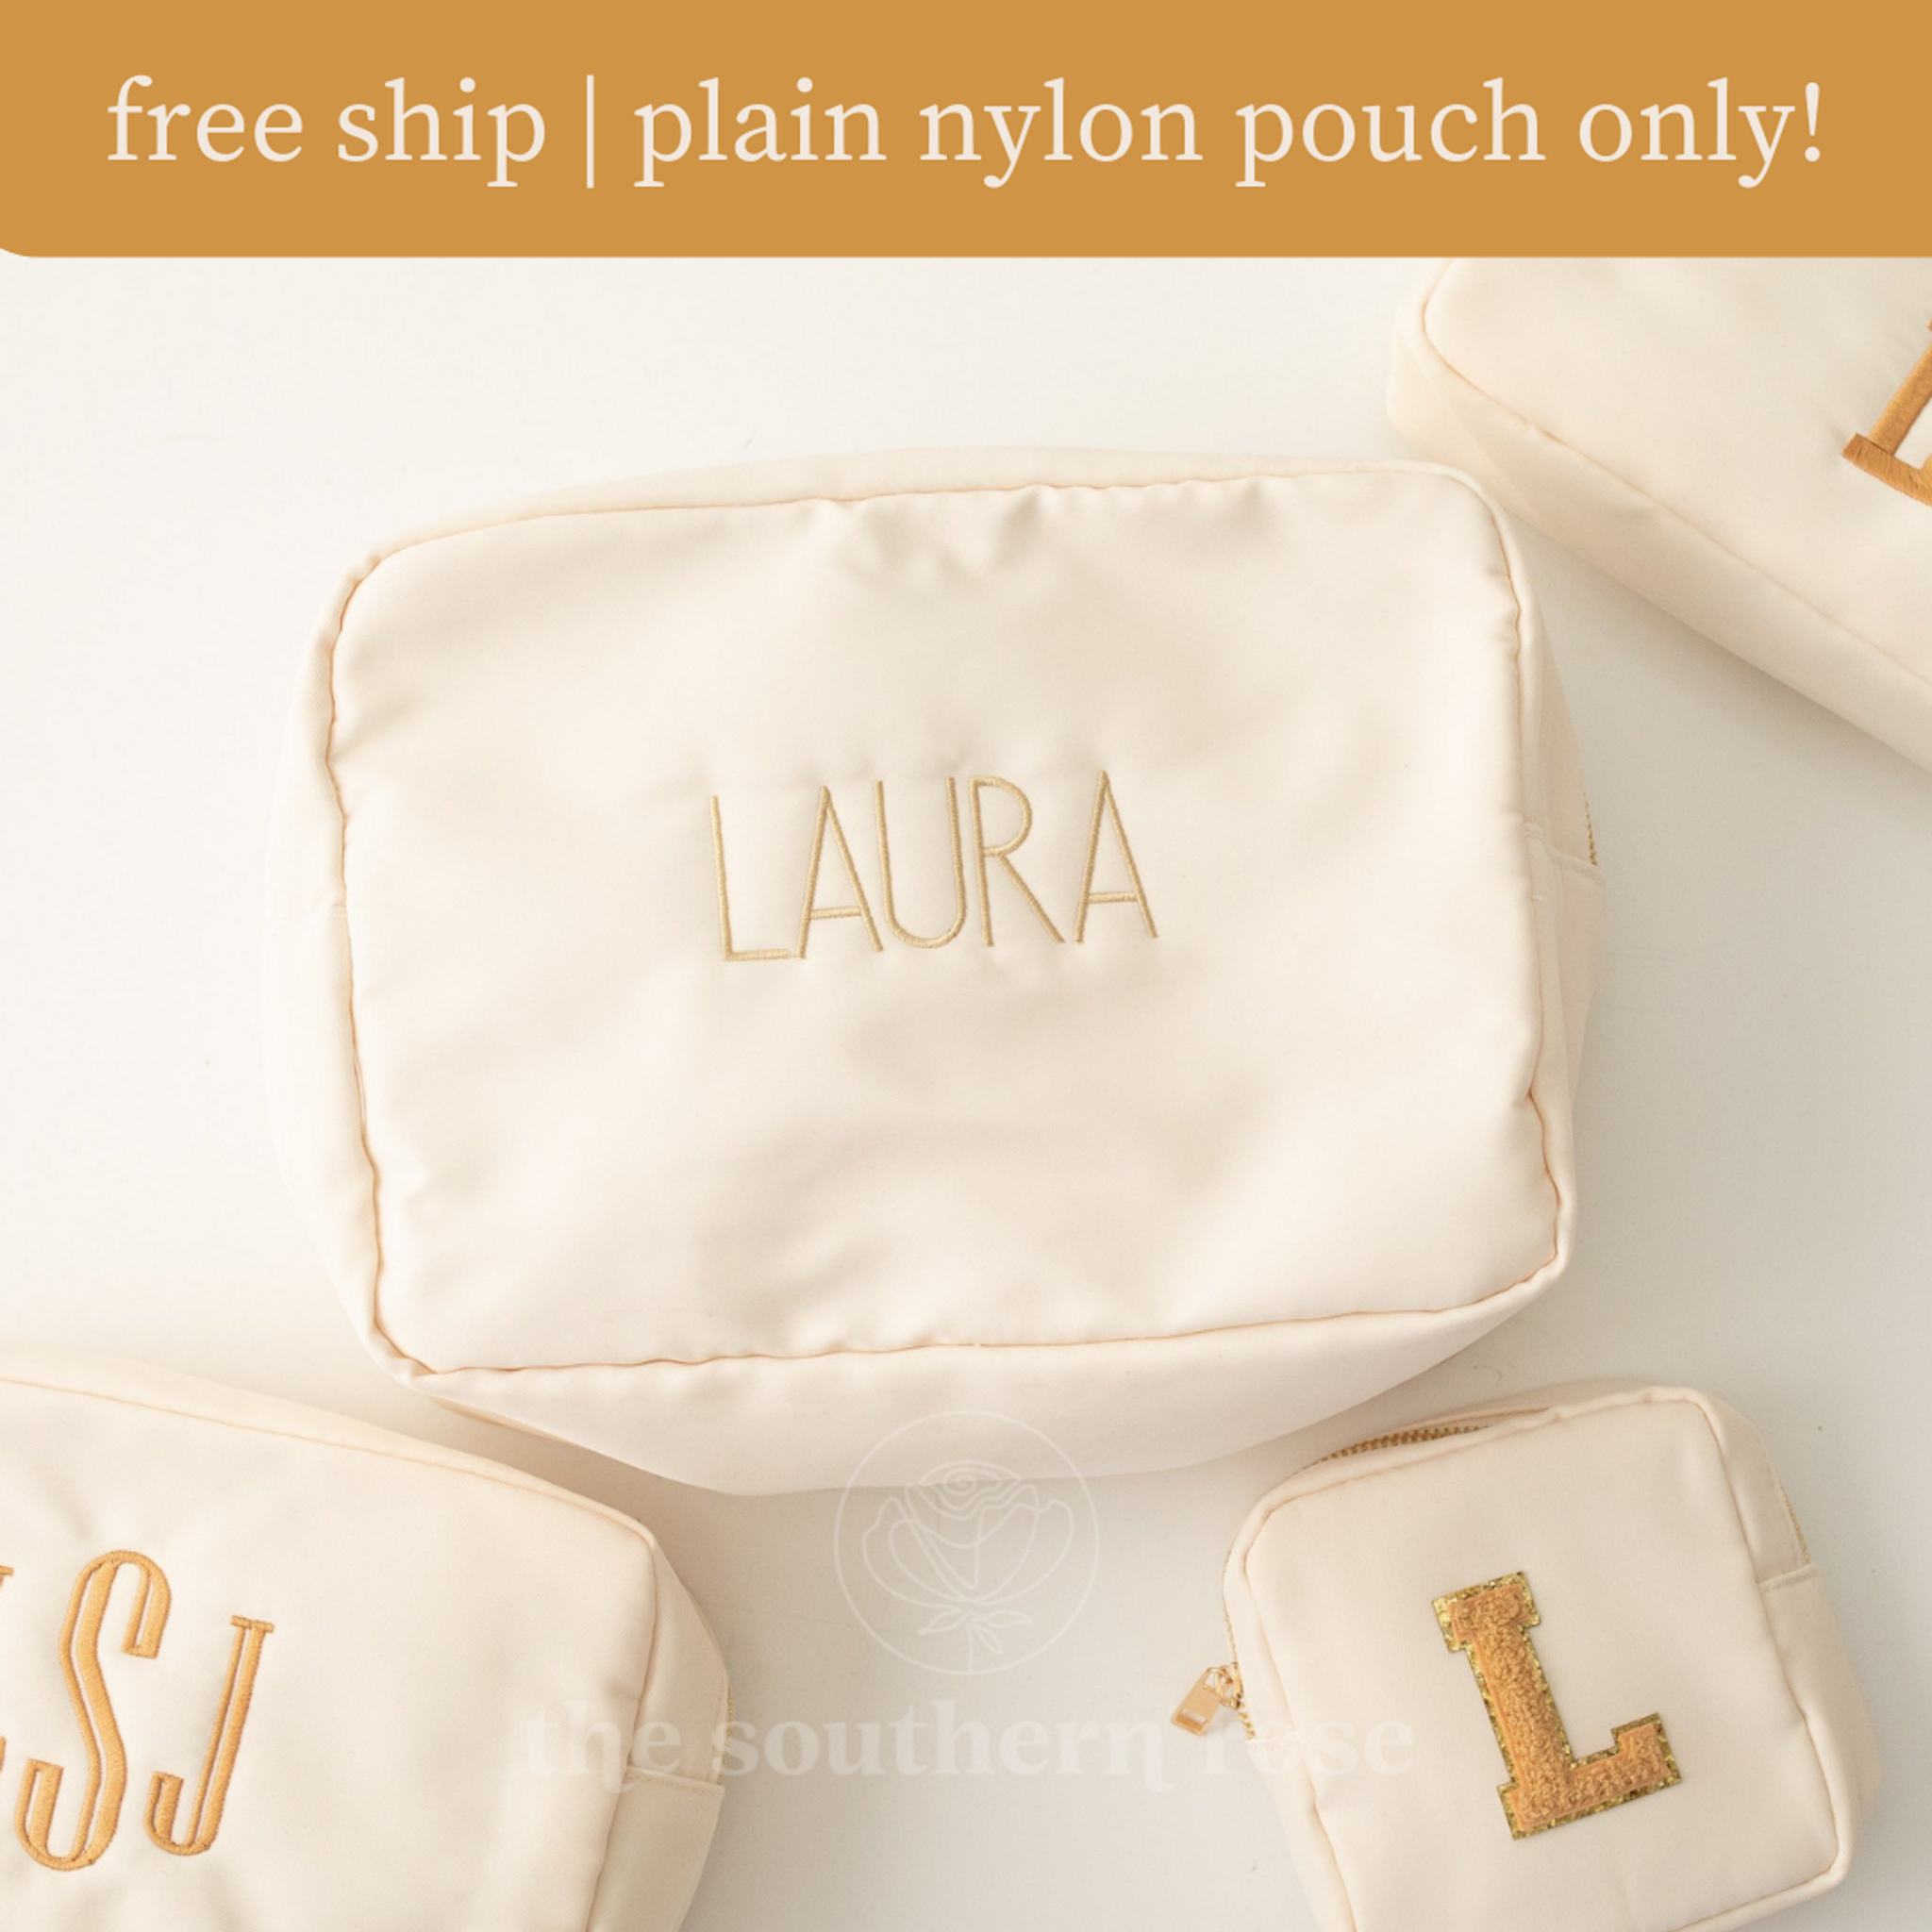 XL Nylon Pouch Cosmetic Bag | 10+ colors! 